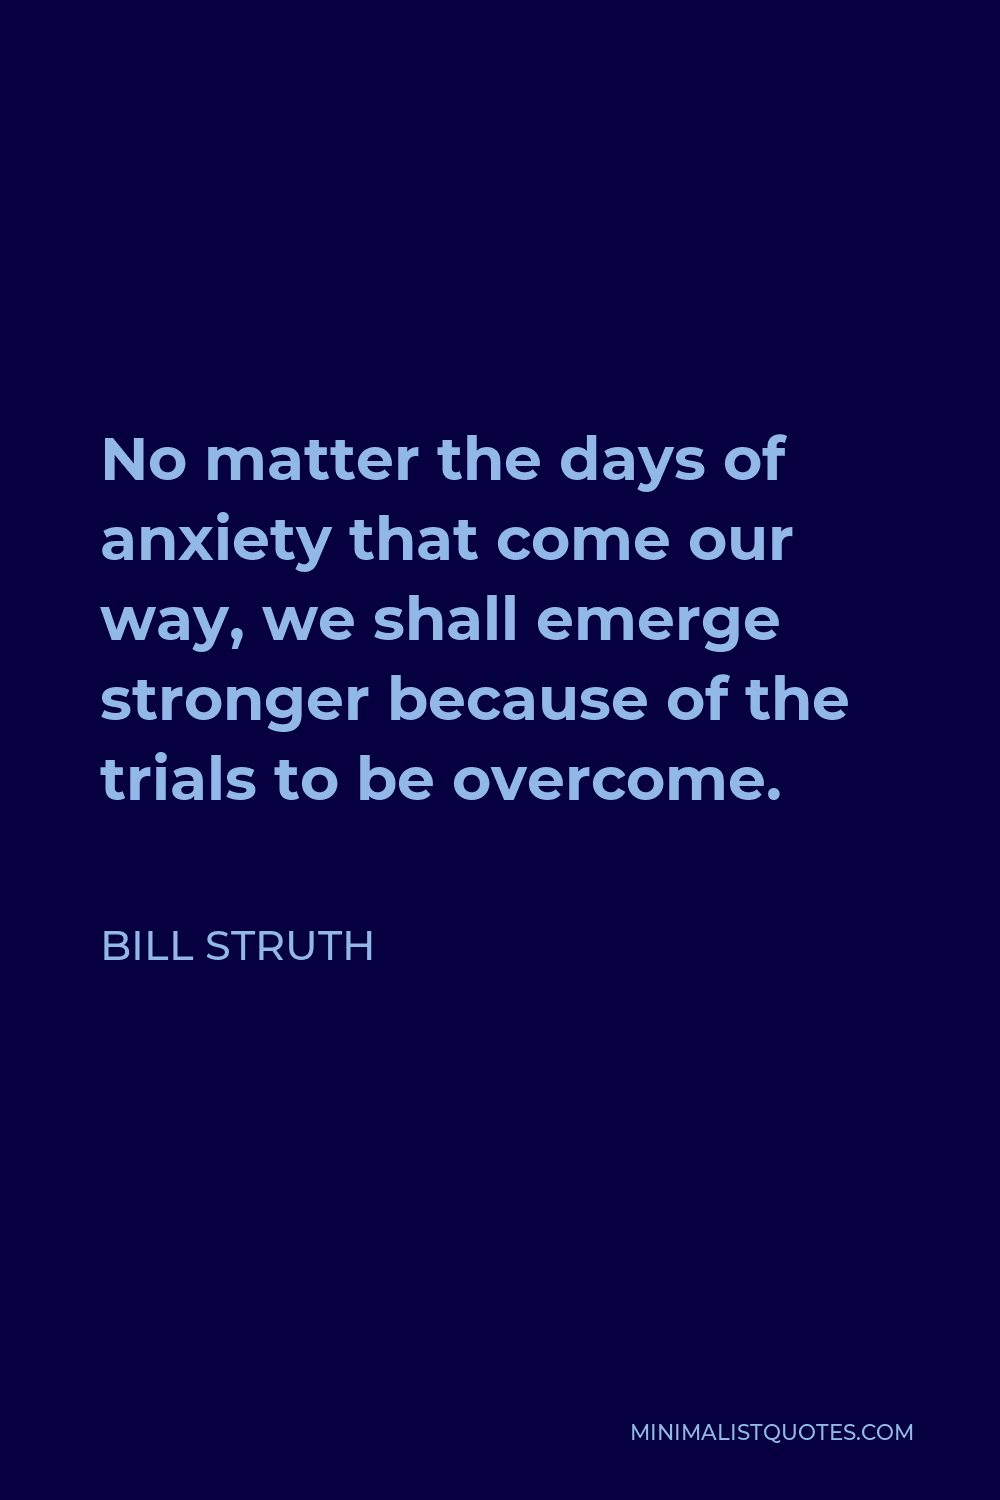 Bill Struth Quote - No matter the days of anxiety that come our way, we shall emerge stronger because of the trials to be overcome.